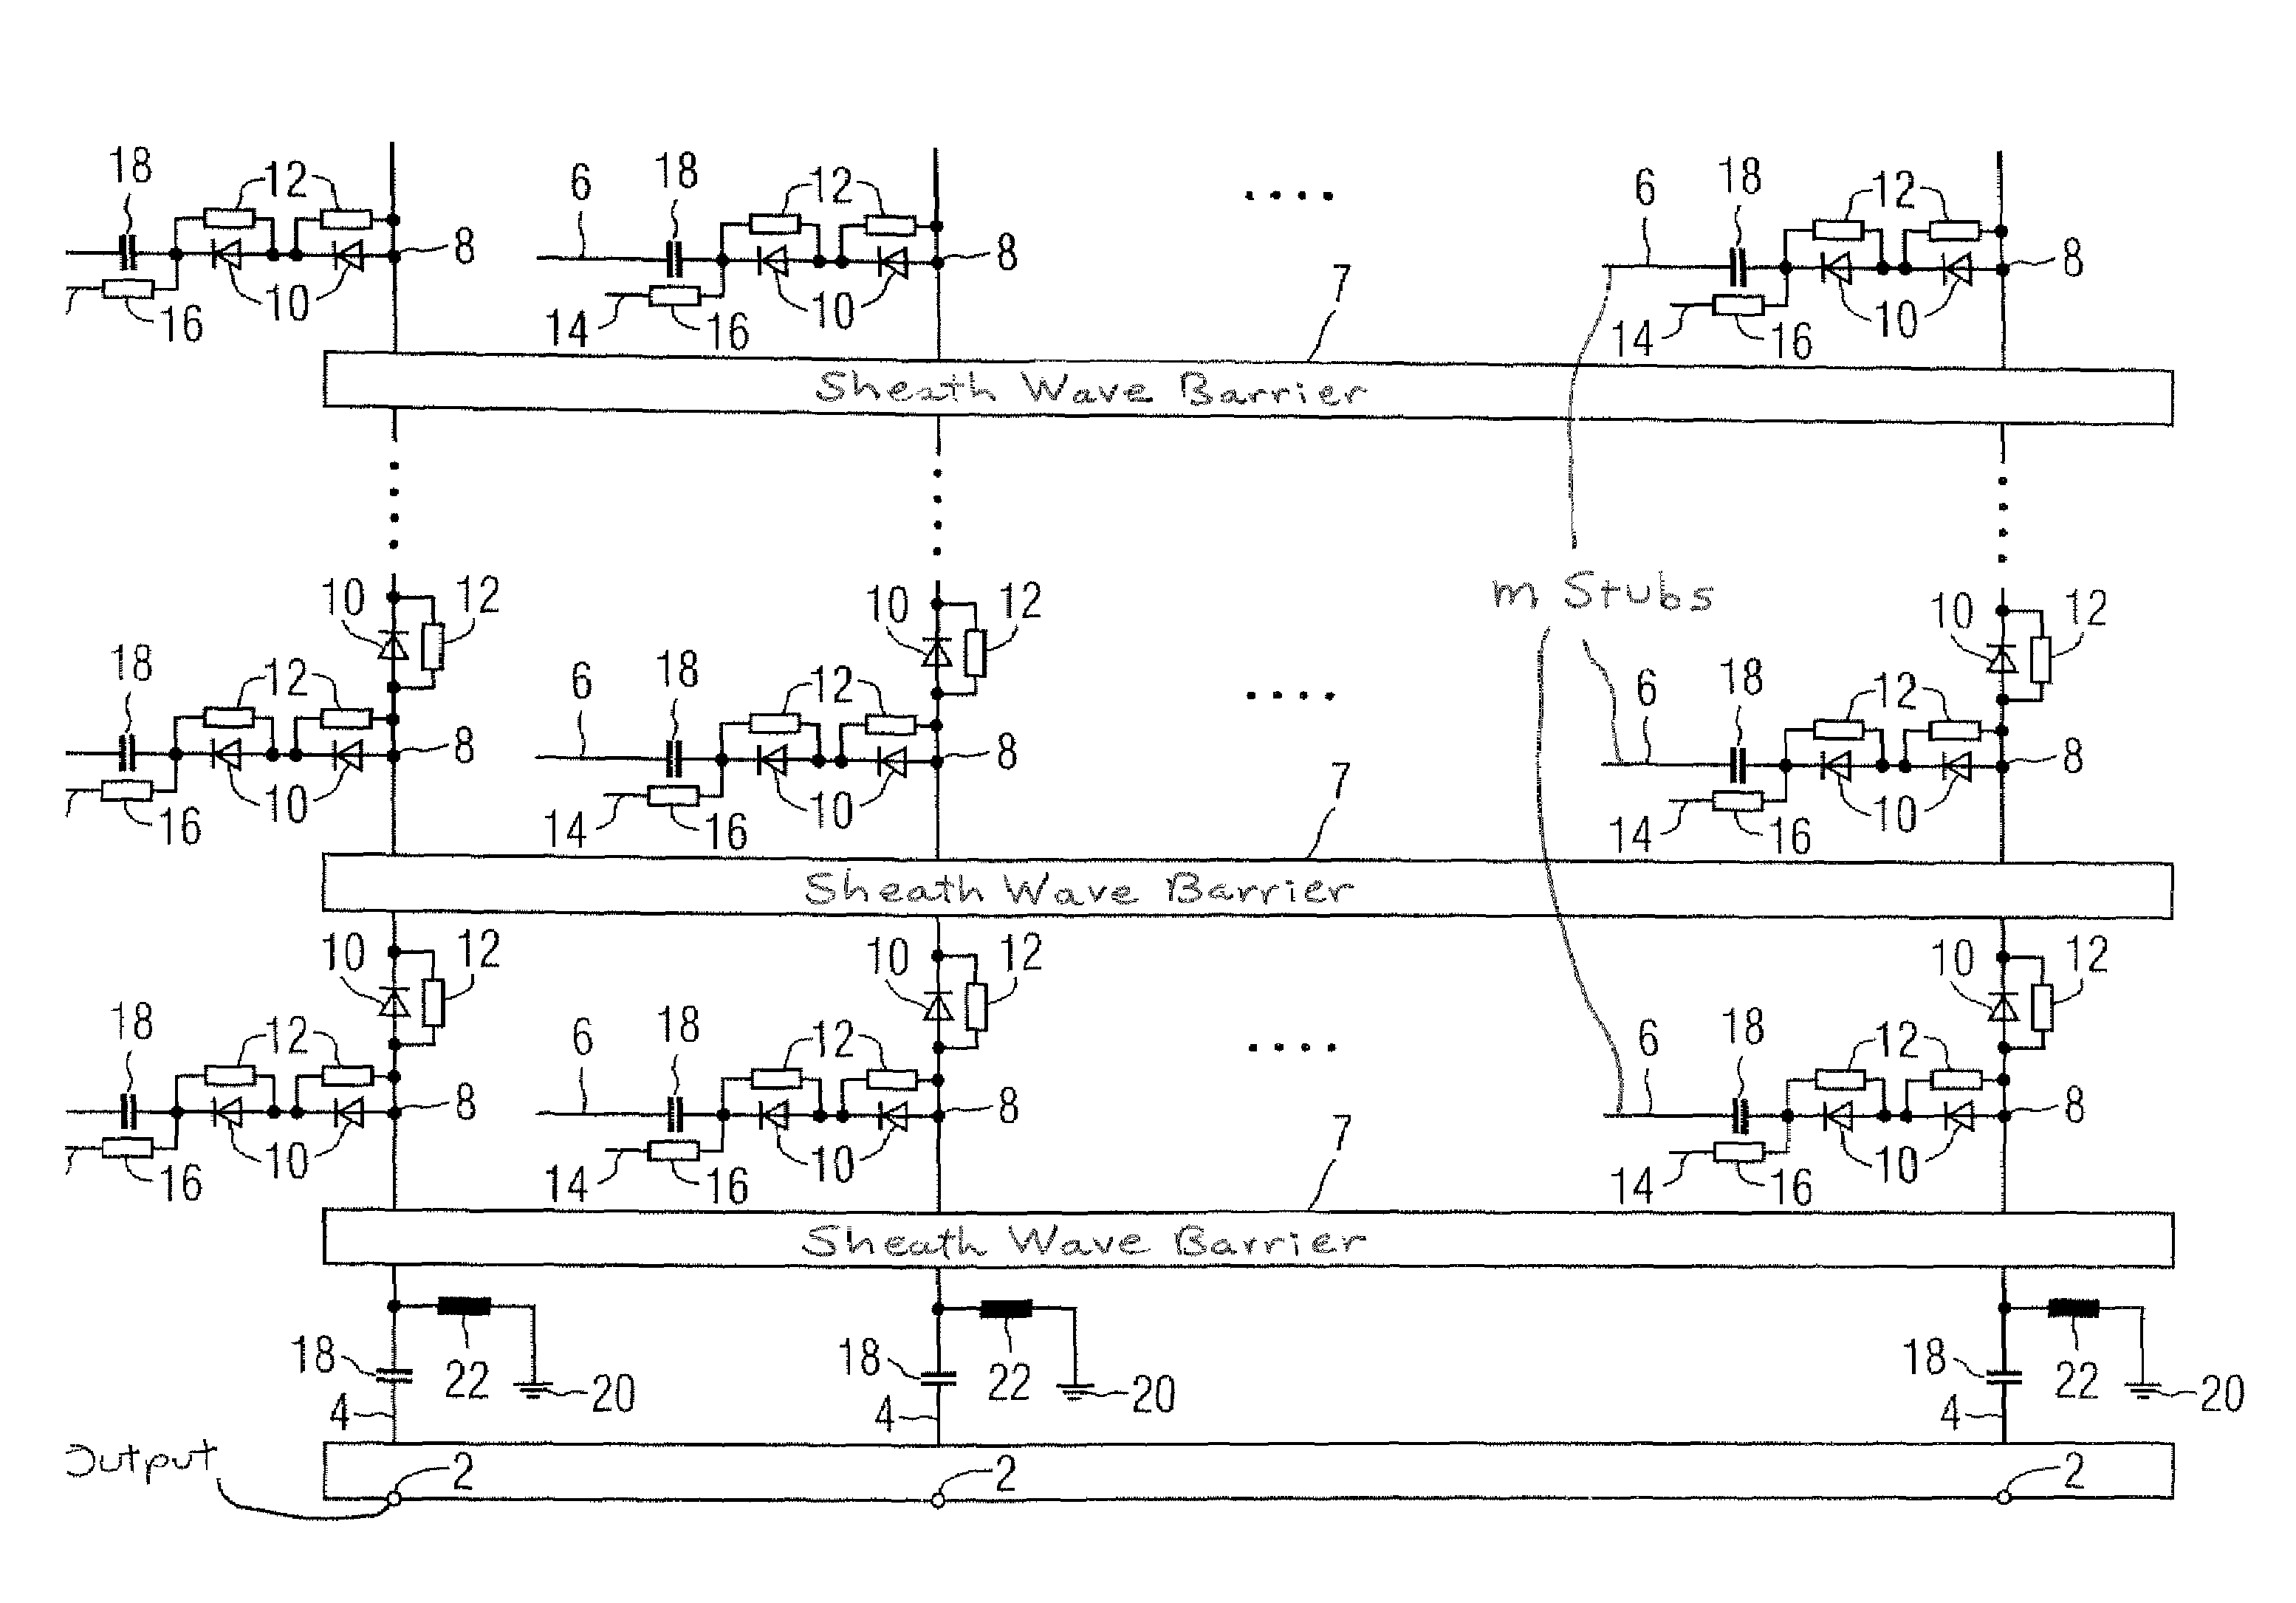 Circuit for connection of at least two signal sources with at least one signal output